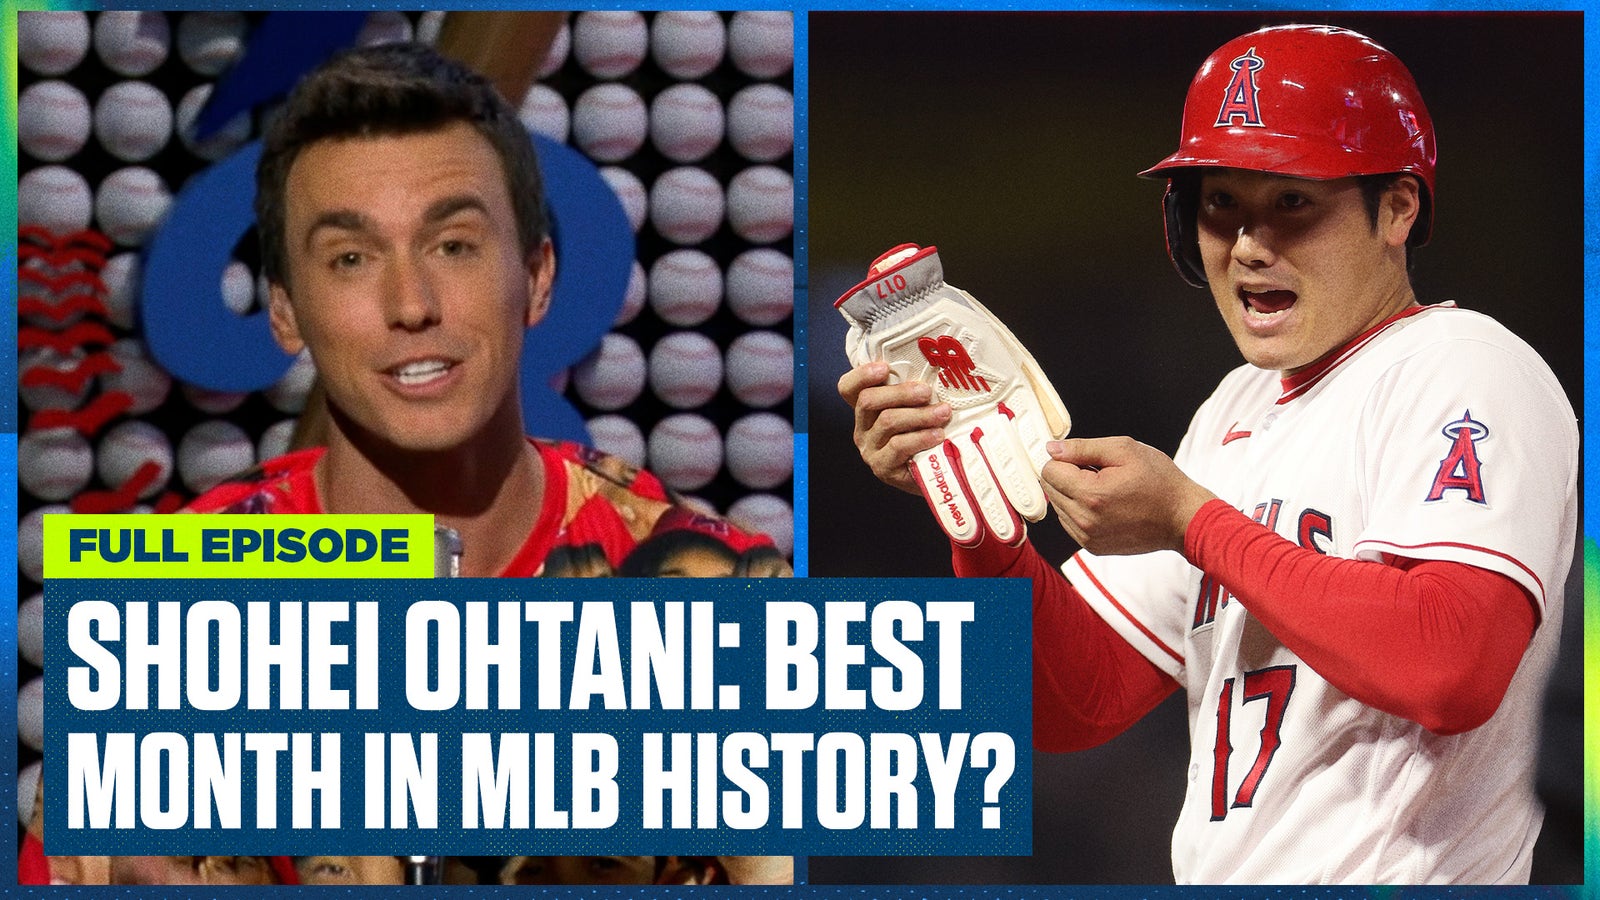 Did Shohei Ohtani just have the best month in MLB history? 